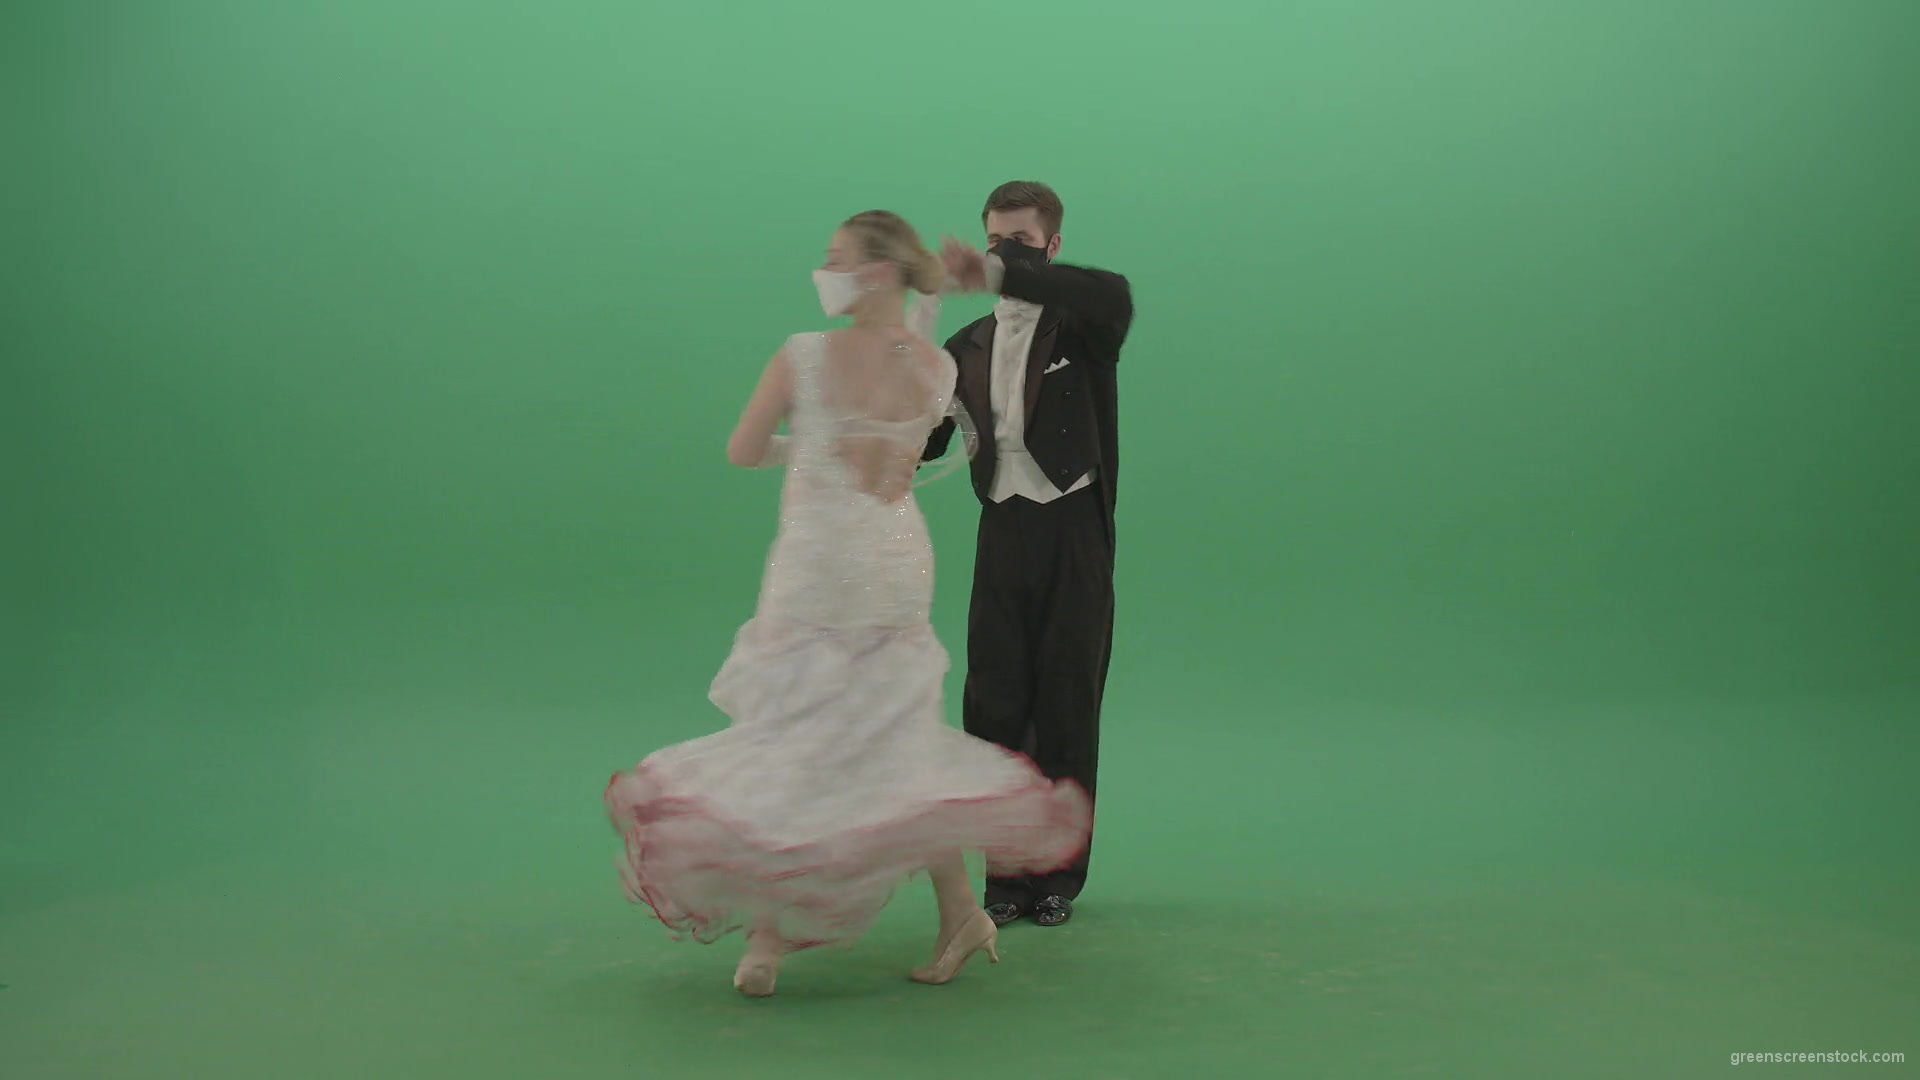 Ballroom-Dancers-Man-and-Woman-making-bowing-regards-and-welcome-Corona-Virus-on-green-screen-4K-Video-Footage-1920_006 Green Screen Stock